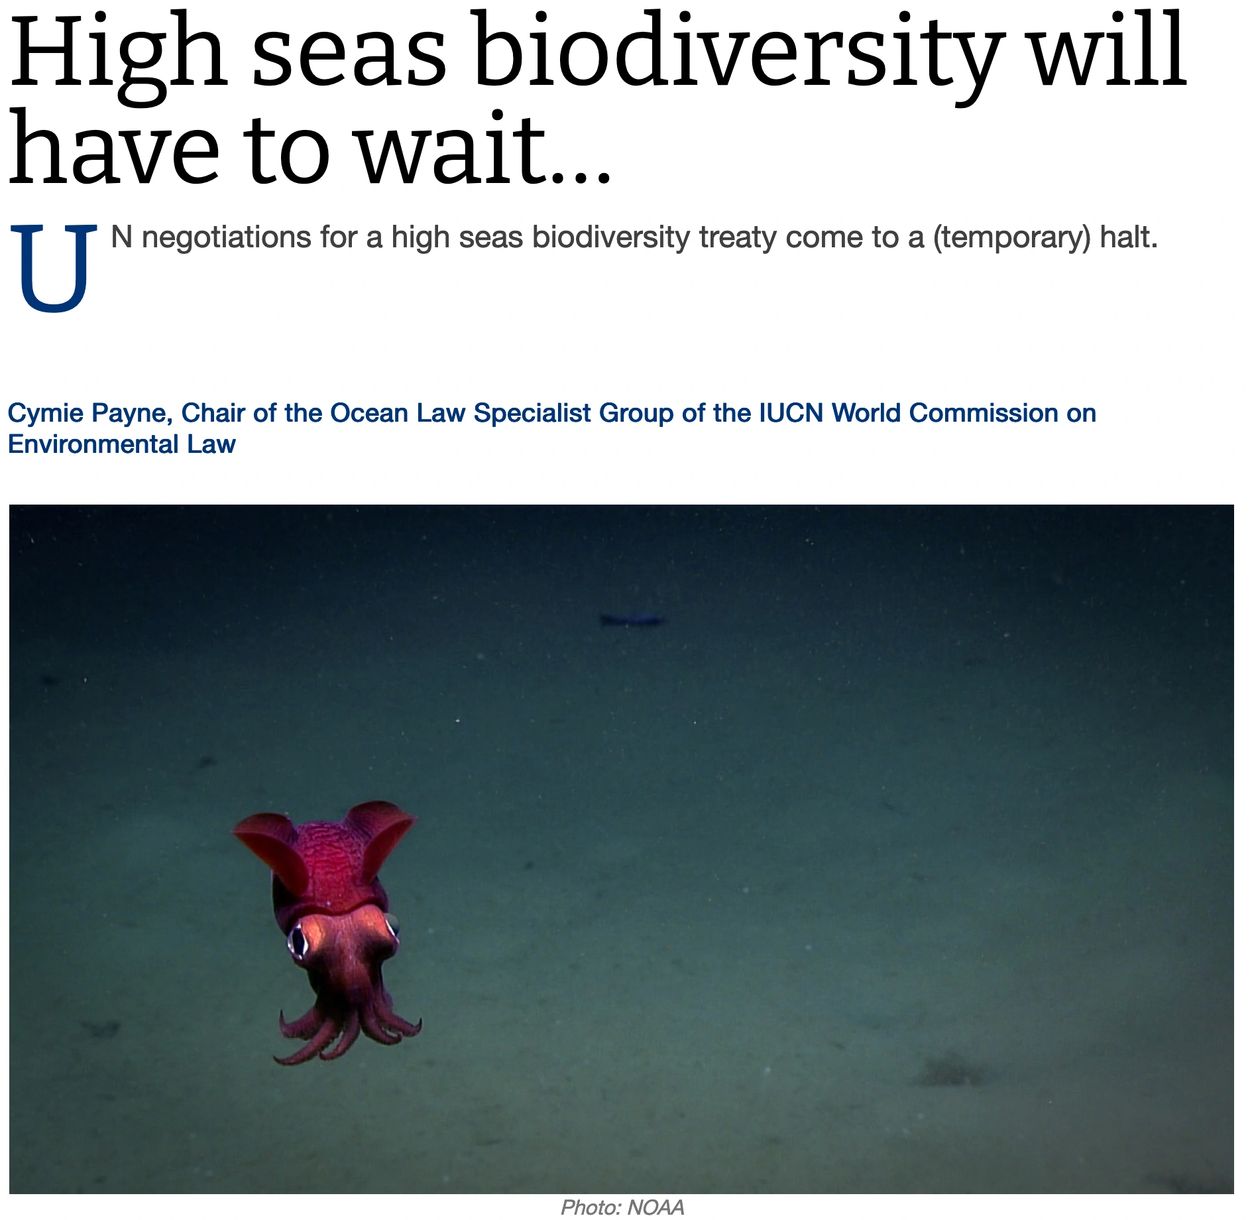 Article titled High seas biodiversity will have to wait dated August 2022